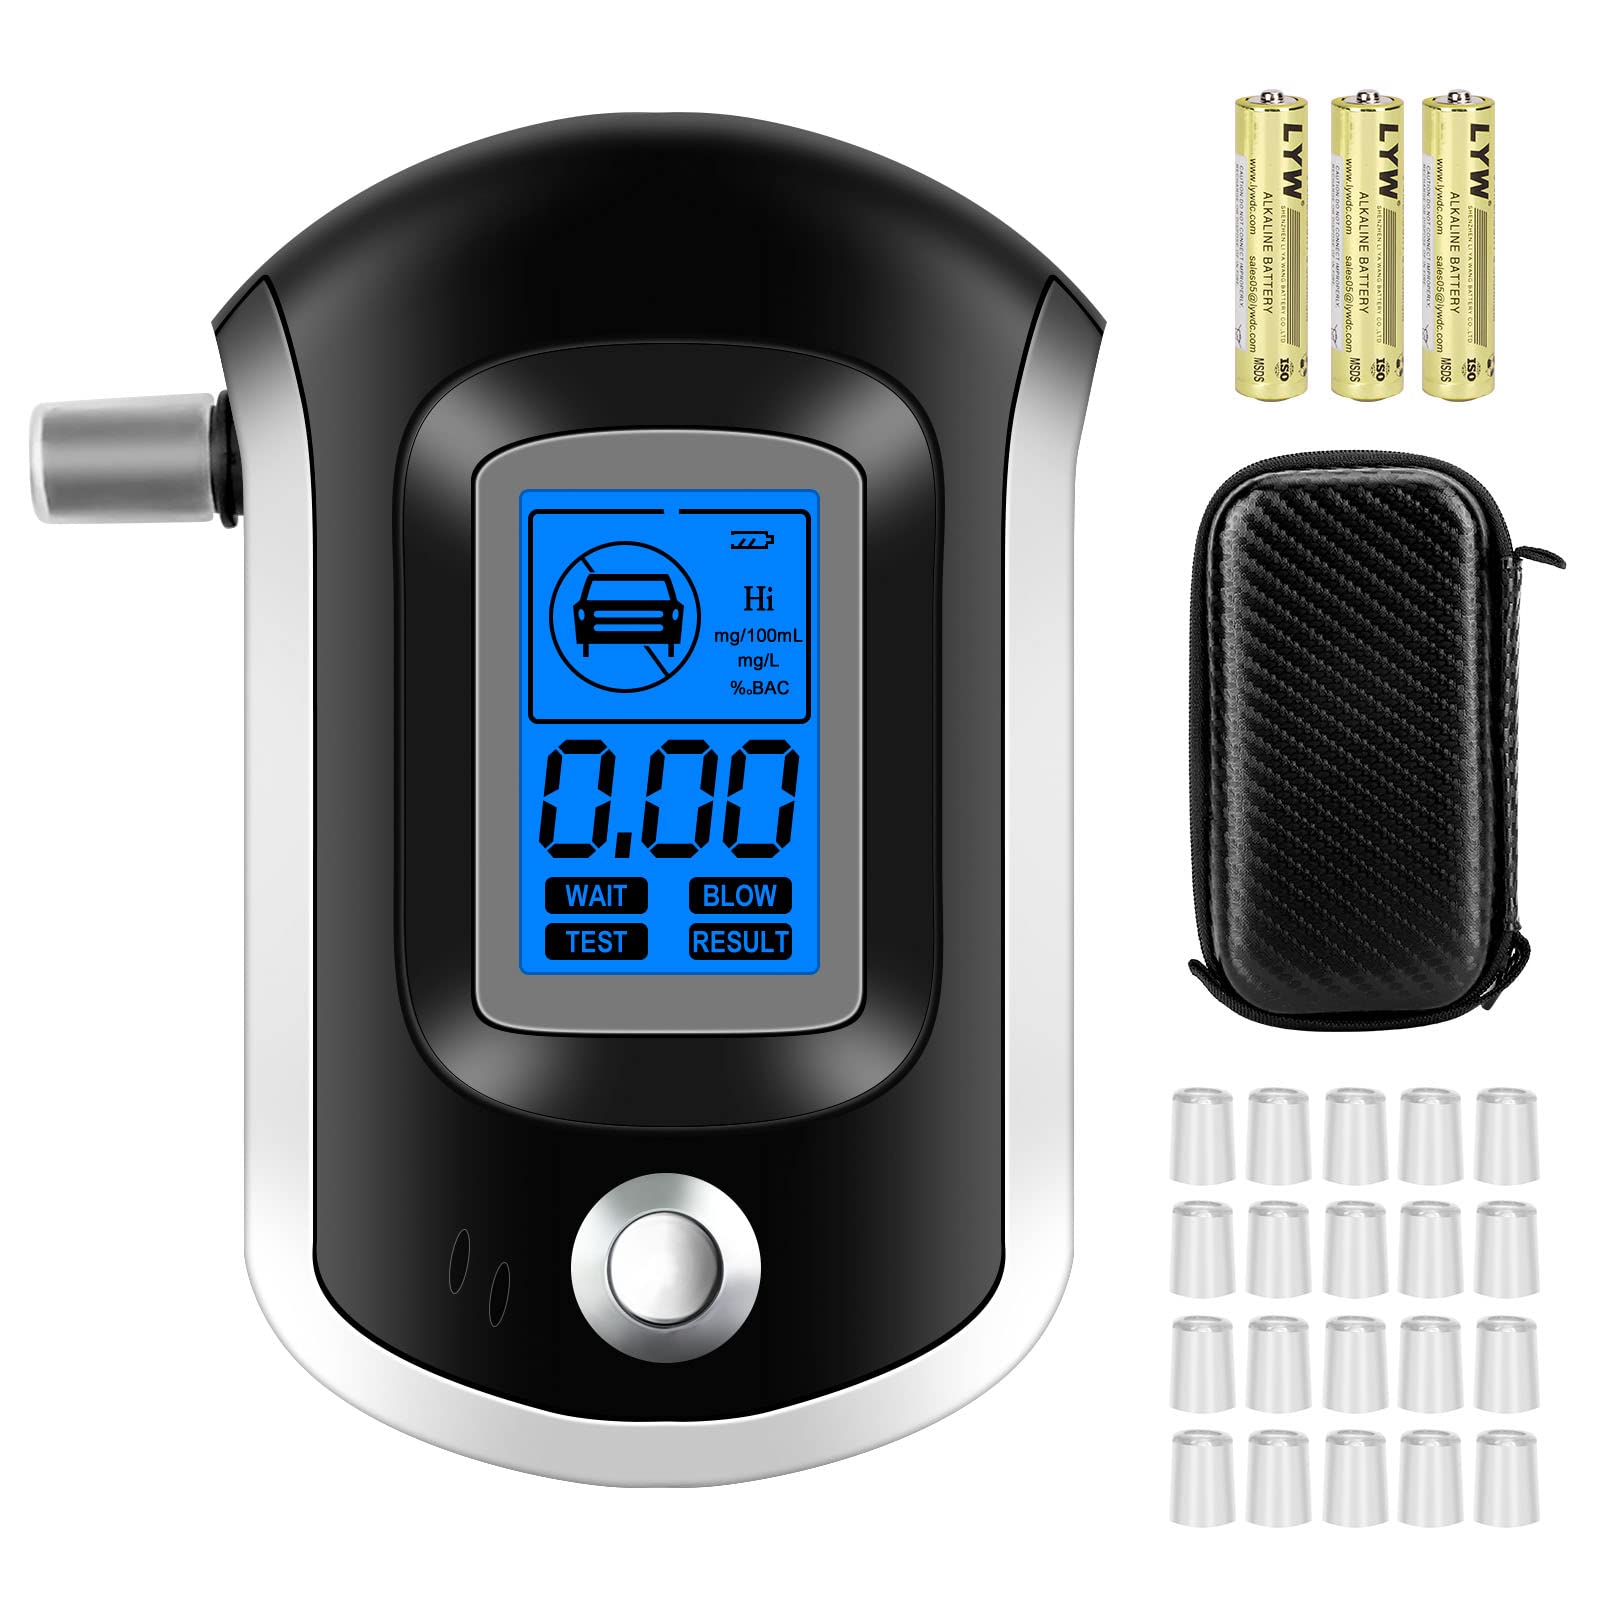 A20 Alcohol Tester Professional Breathalyzer Alcotest With LED